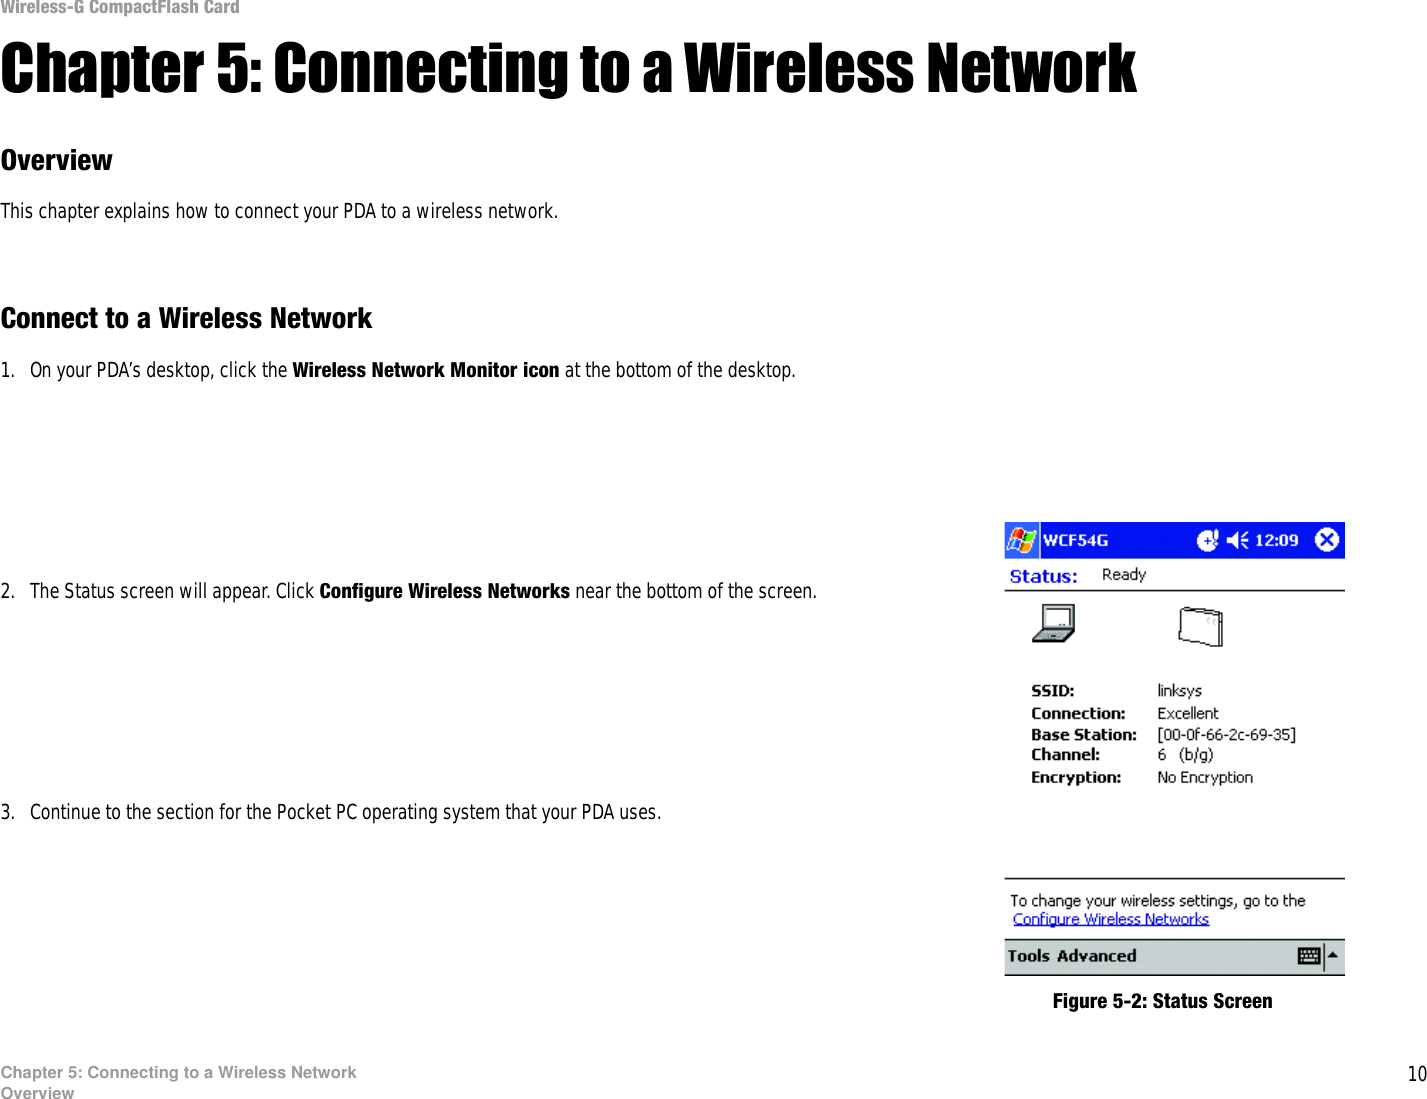 10Chapter 5: Connecting to a Wireless NetworkOverviewWireless-G CompactFlash CardChapter 5: Connecting to a Wireless Network OverviewThis chapter explains how to connect your PDA to a wireless network. Connect to a Wireless Network1. On your PDA’s desktop, click the Wireless Network Monitor icon at the bottom of the desktop.2. The Status screen will appear. Click Configure Wireless Networks near the bottom of the screen.3. Continue to the section for the Pocket PC operating system that your PDA uses.Figure 5-2: Status Screen